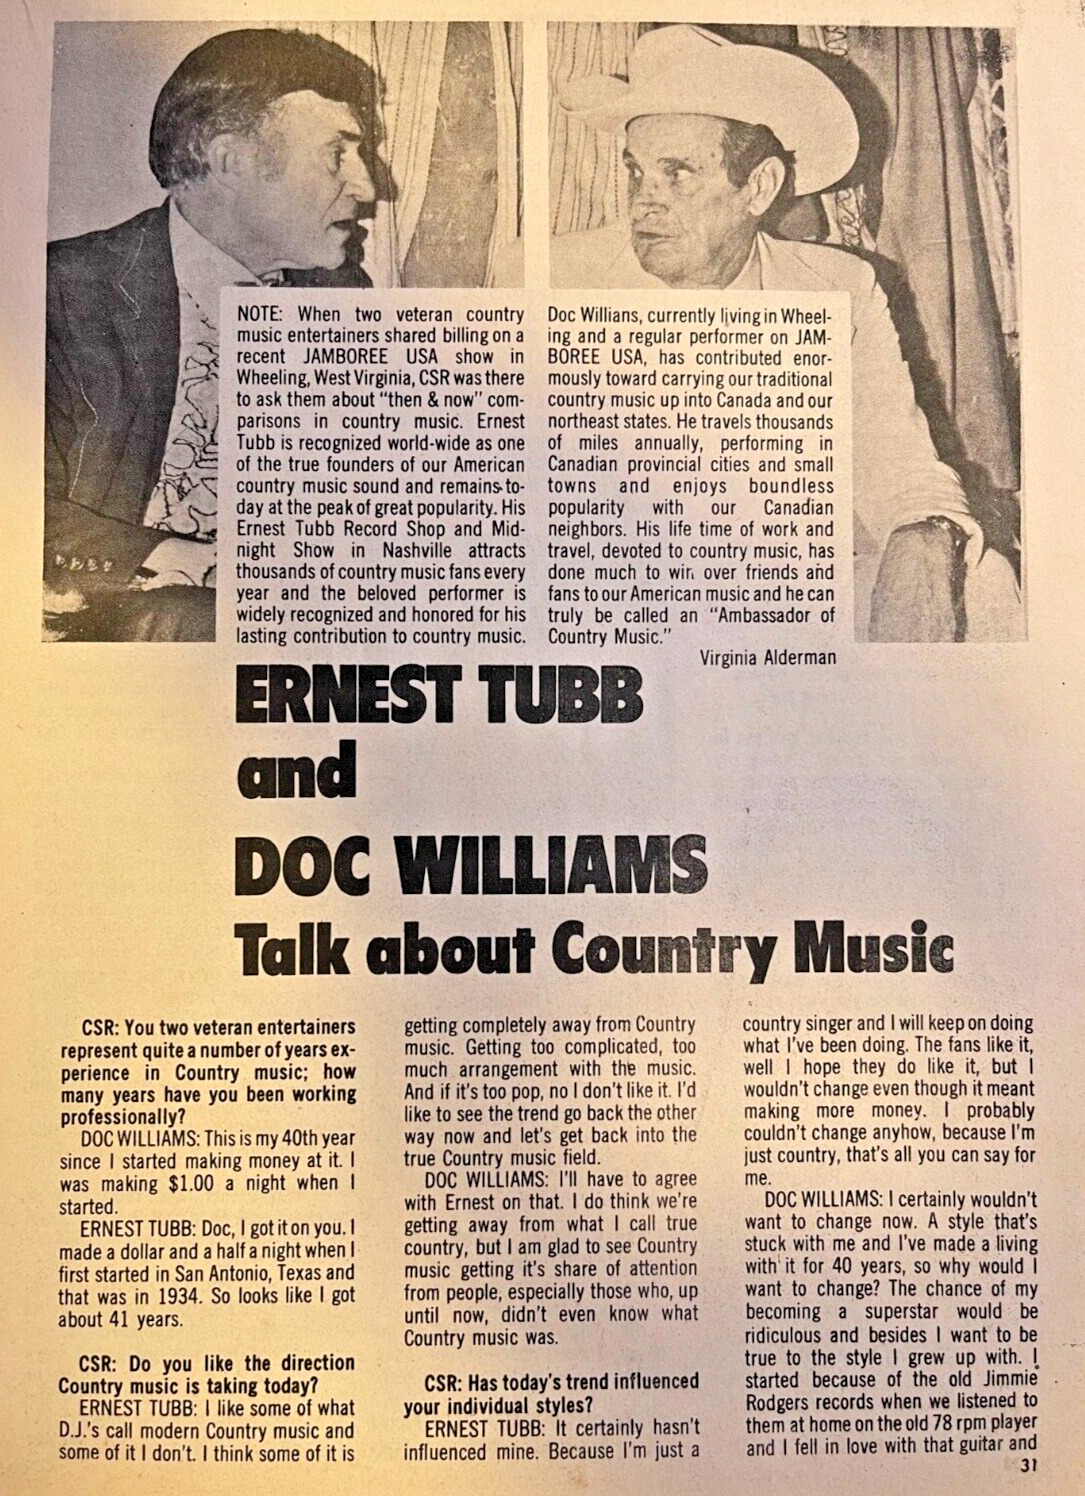 1976 Country Singers Ernest Tubb and Doc Williams